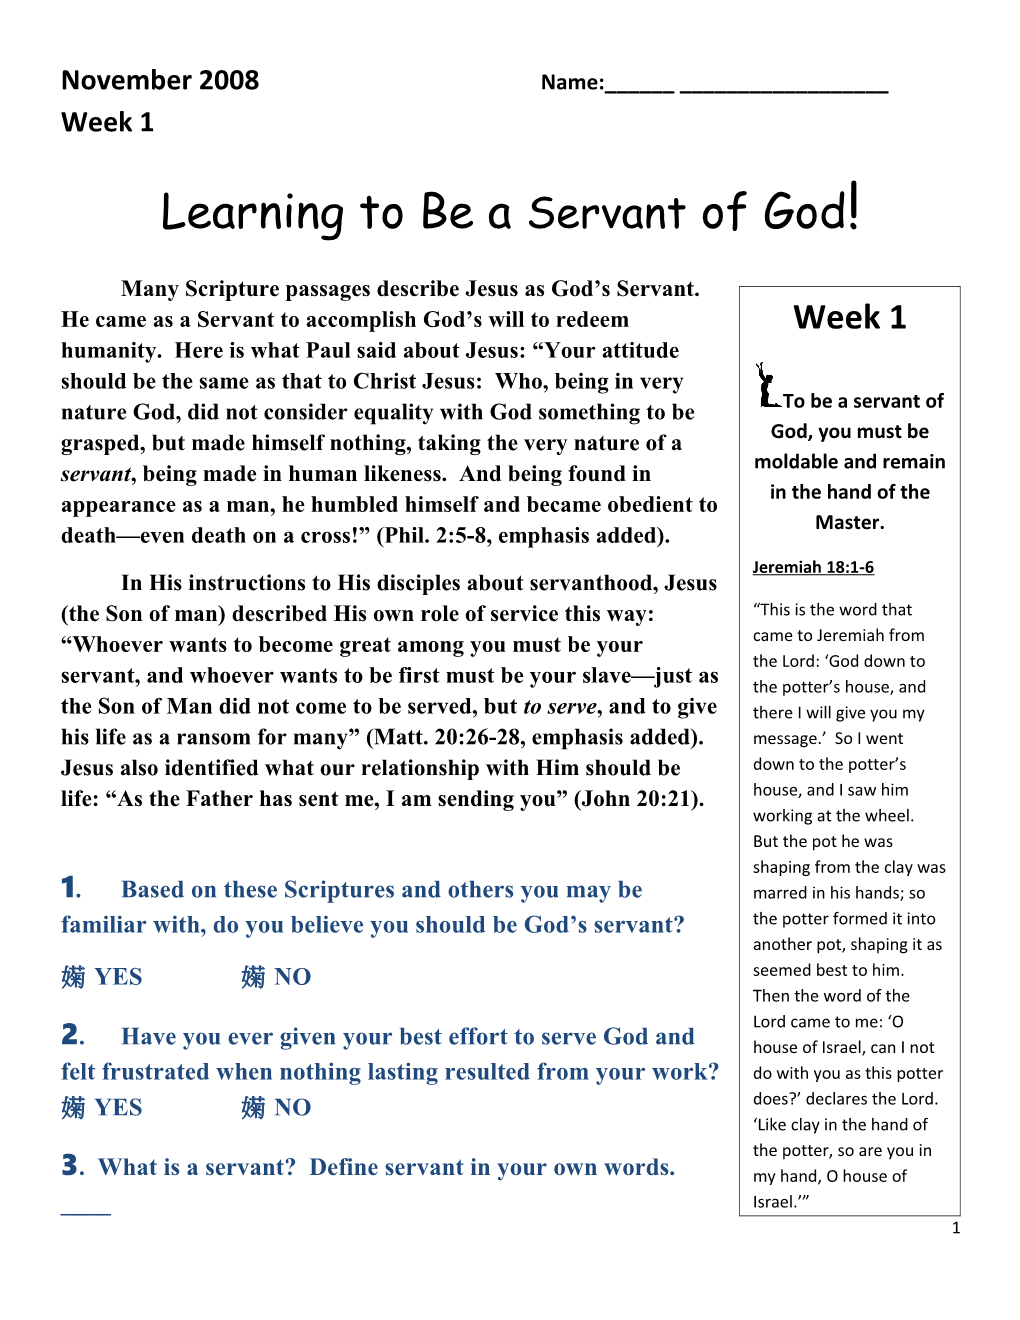 Learning to Be a Servant of God!